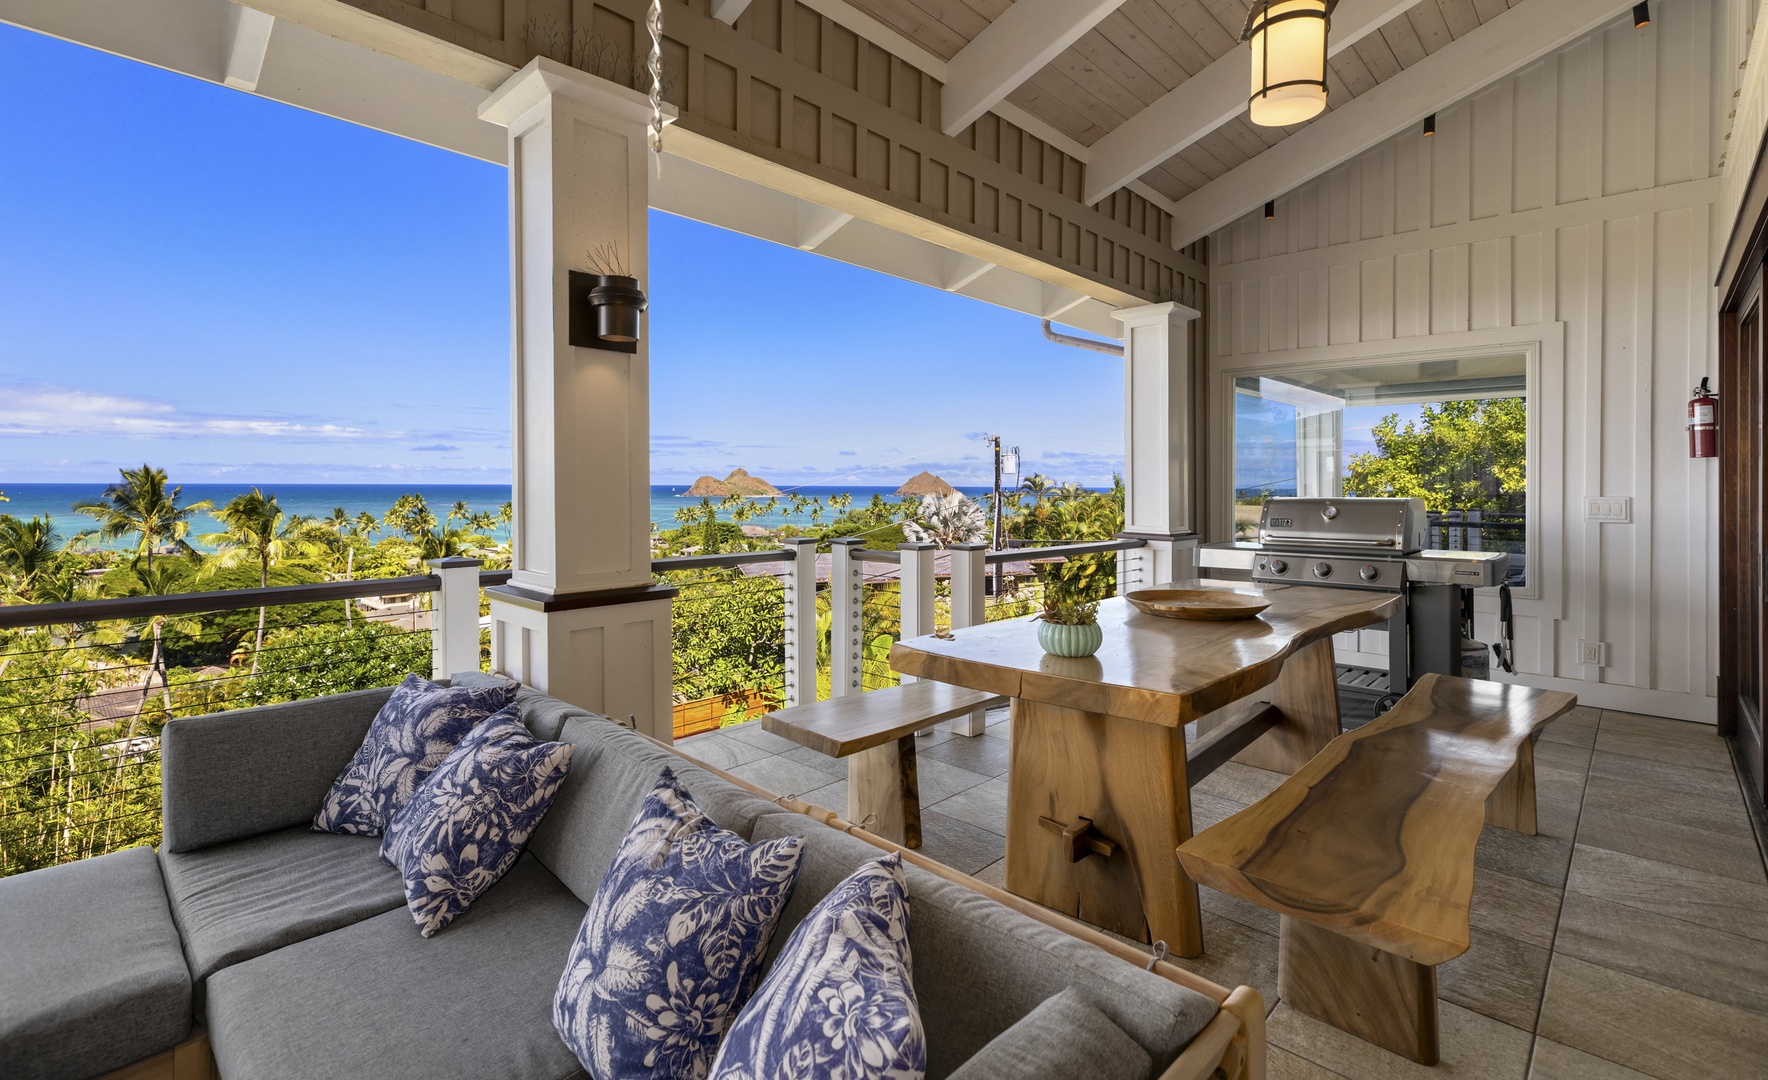 Kailua Vacation Rentals, Lanikai Villa - There are plenty of options for entertainment on the main lanai with and outdoor lounge and dining area with a BBQ